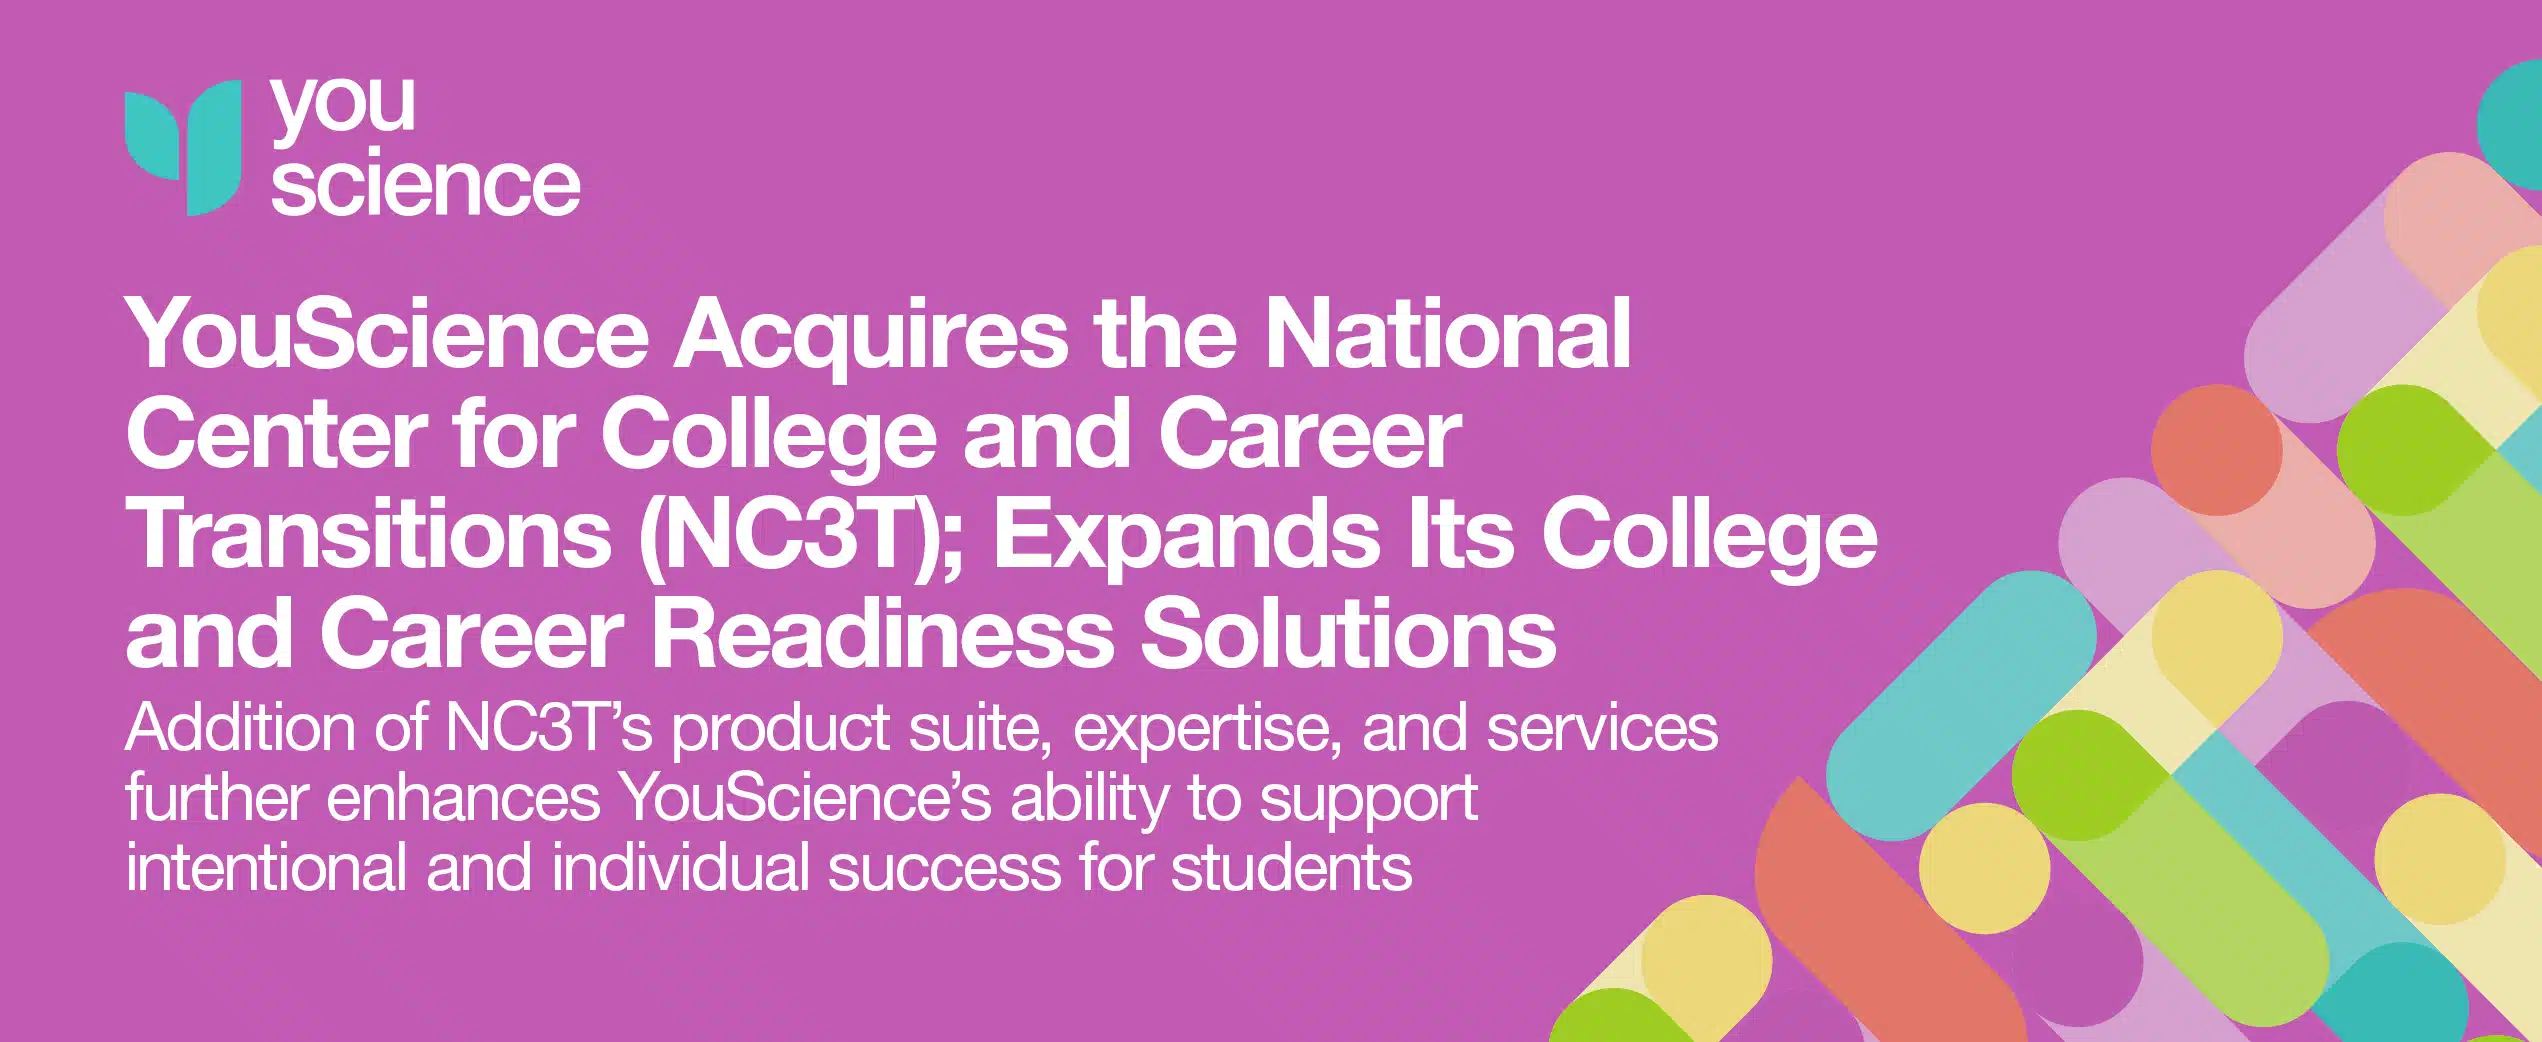 YouScience acquires the National Center for College and Career Transitions